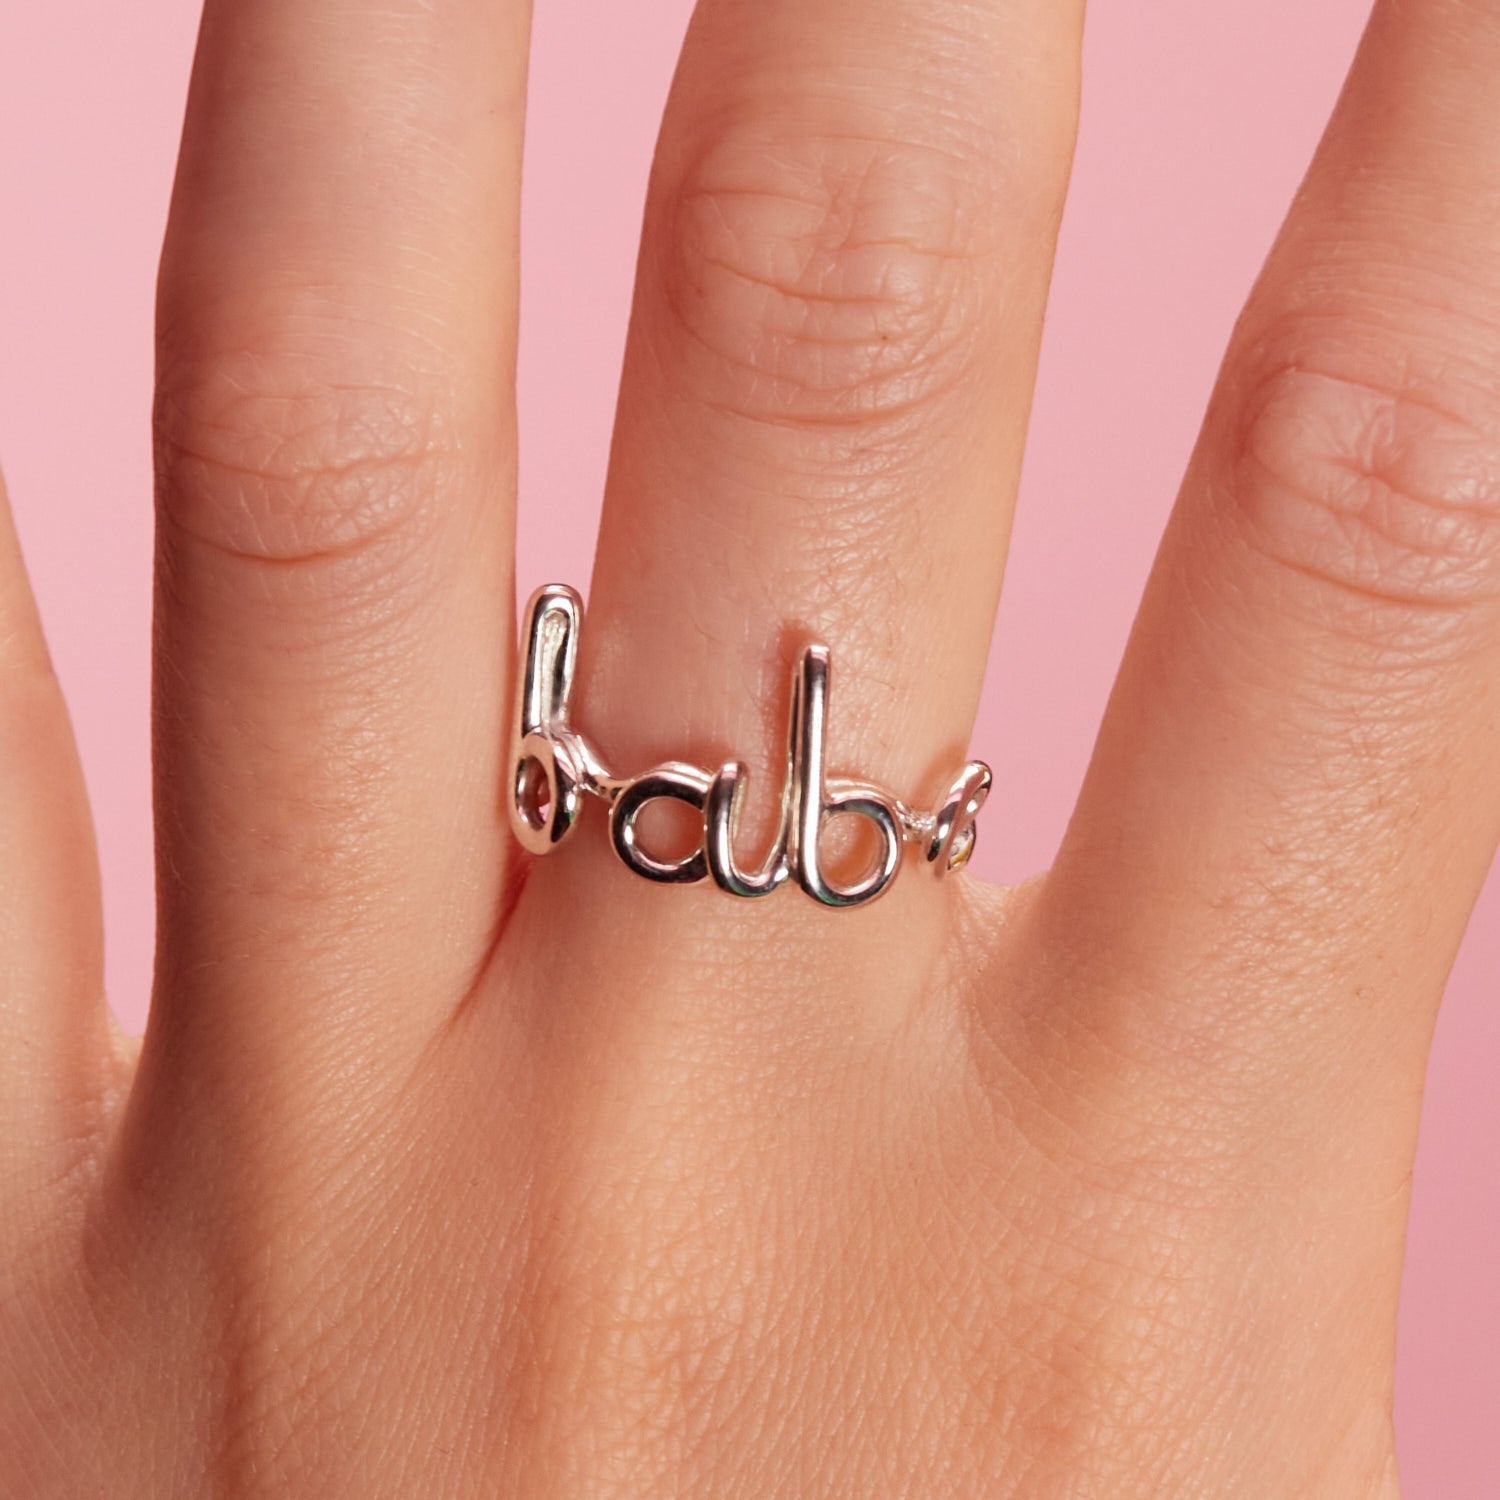 Babe Hotscripts silver ring front view on model